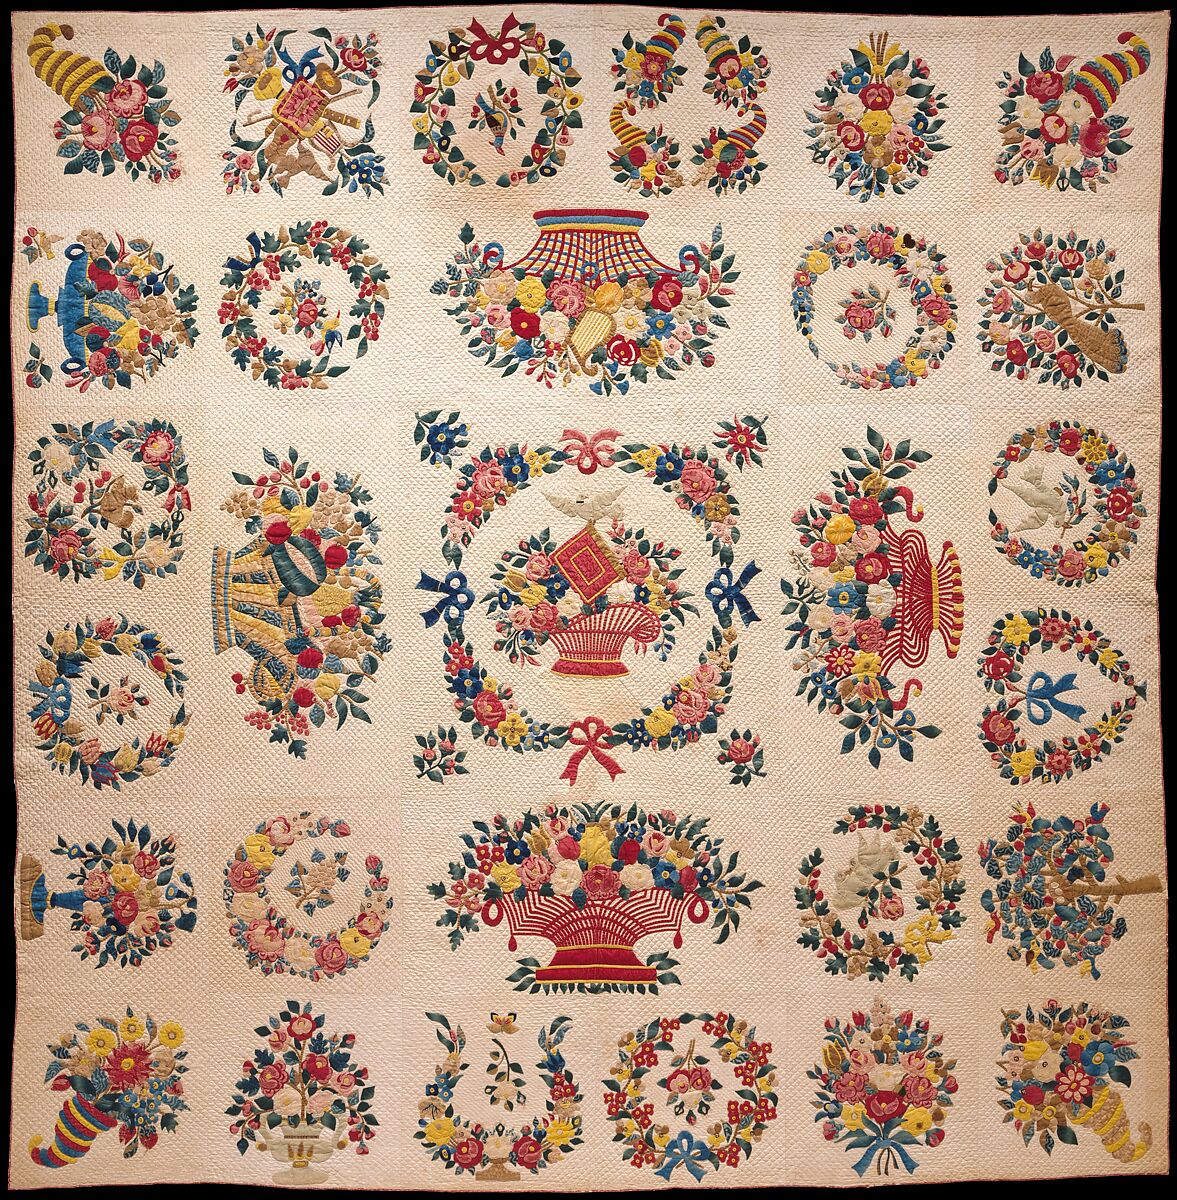 Quilt, Presentation pattern, Designs attributed to Mary Hergenroder Simon (1808–1877), Cotton and silk velvet, American 